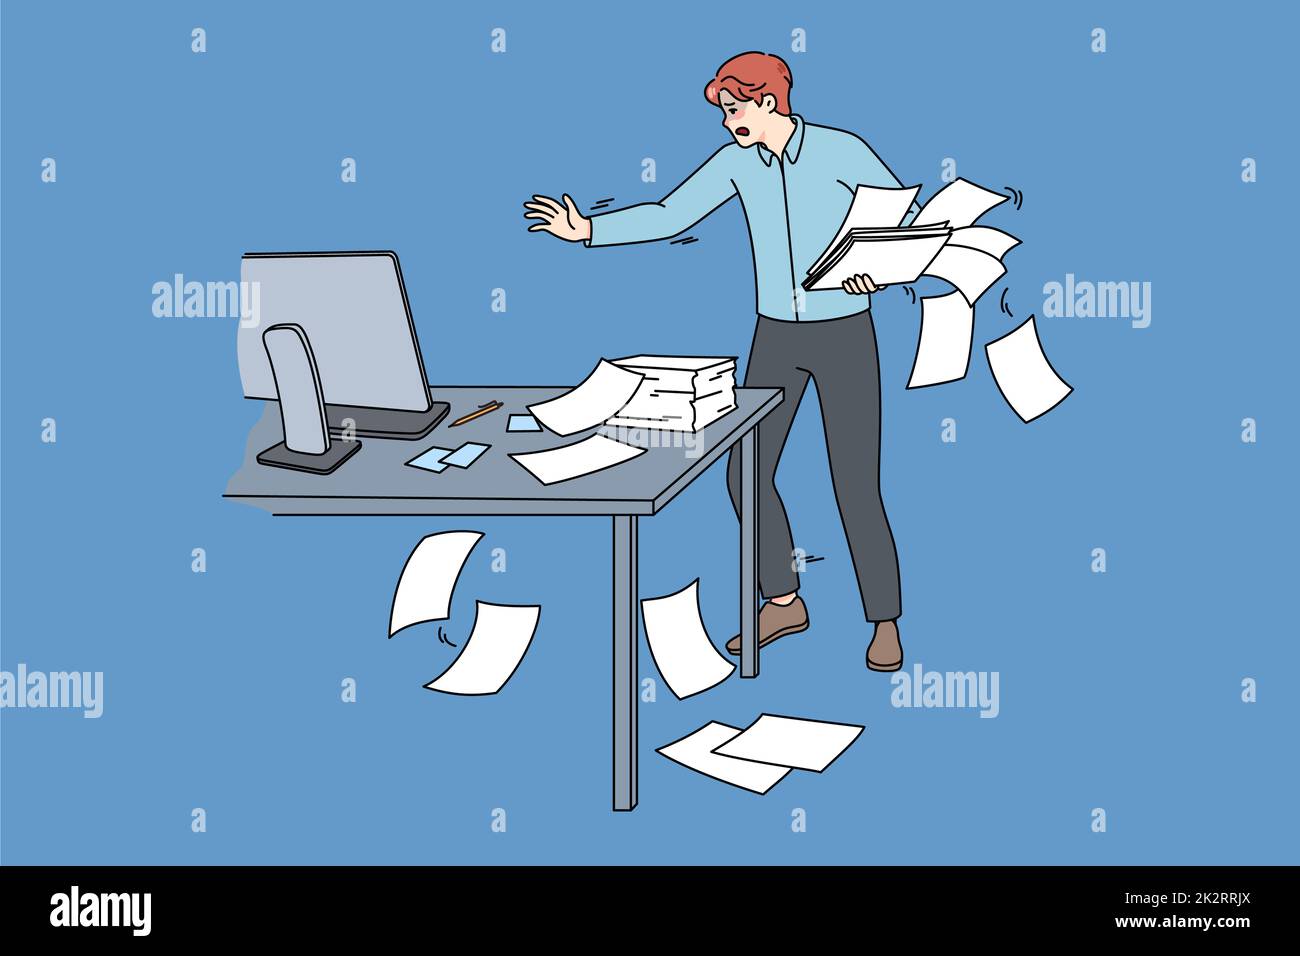 Clumsy employee collect paperwork in office Stock Photo